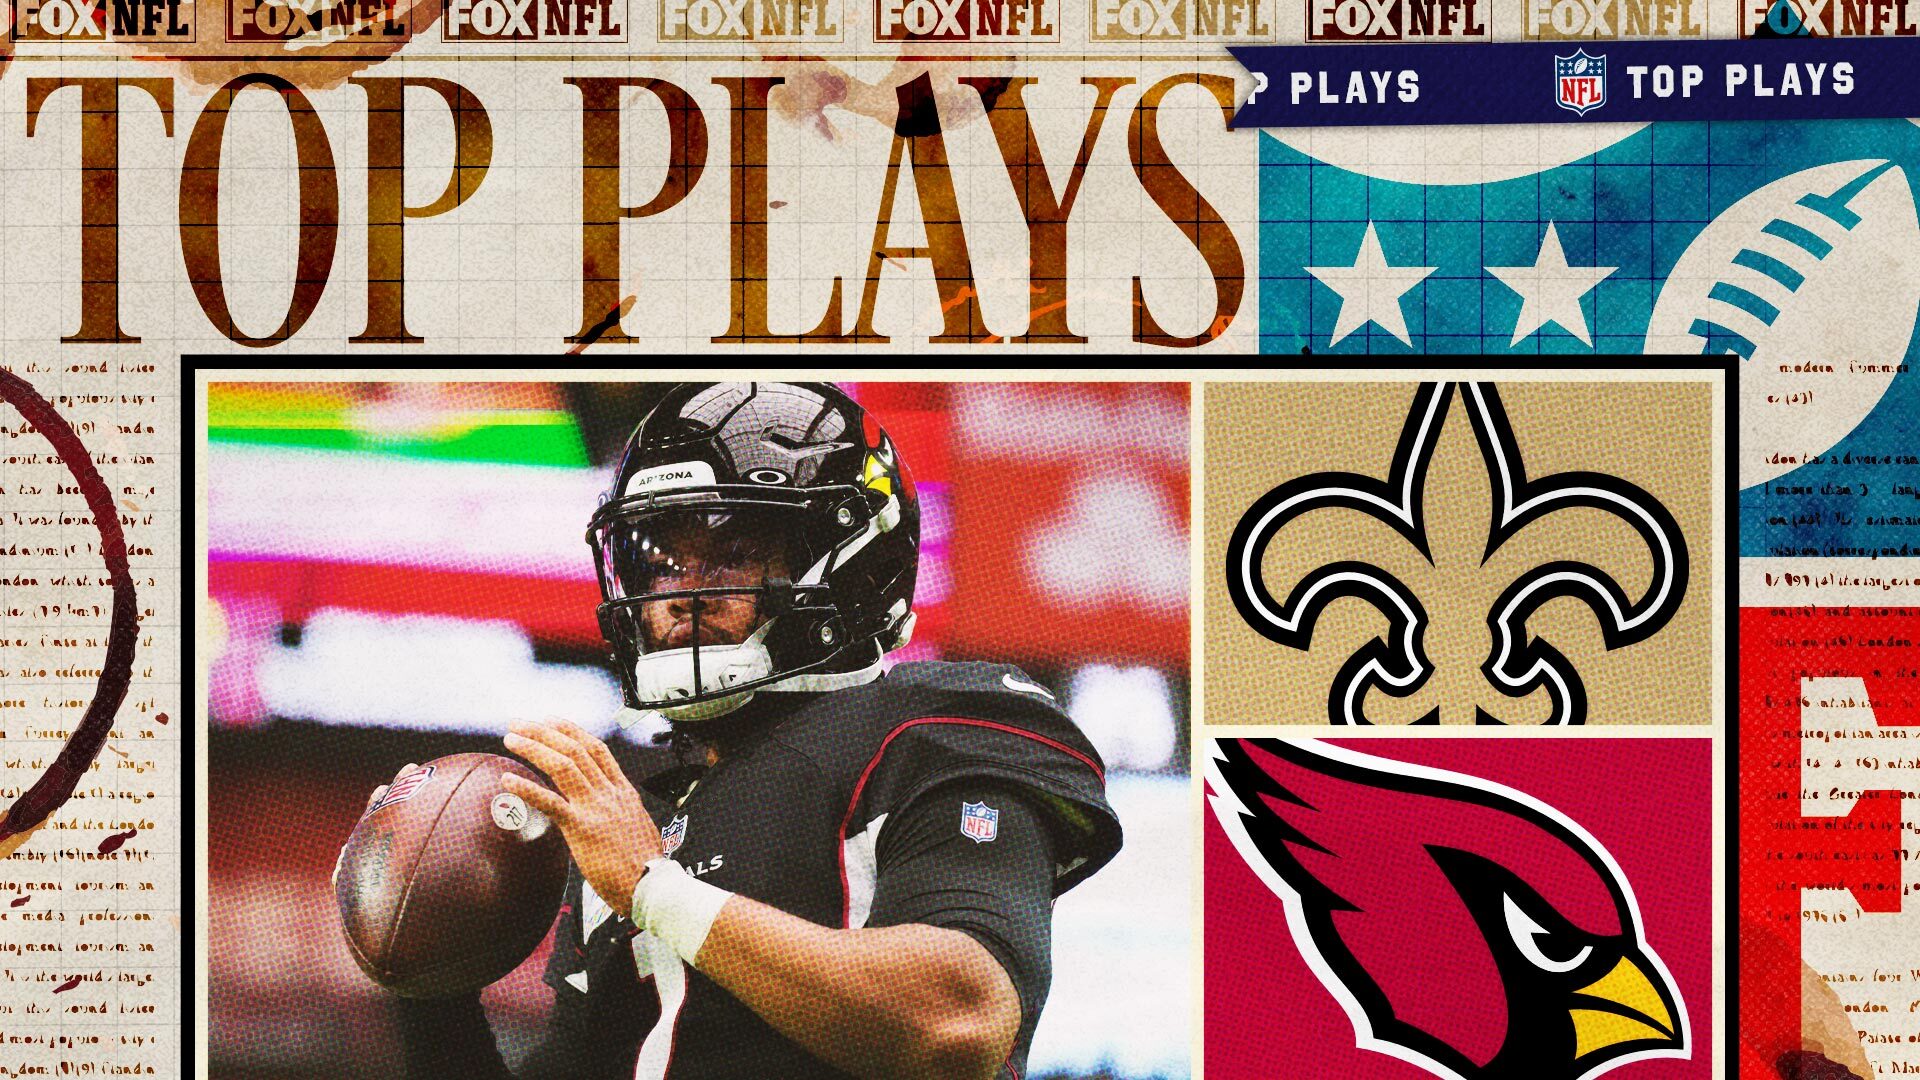 Saints vs. Cardinals Computer Picks, NFL Odds and Prediction for Thursday  Night Football on October 20, 2022